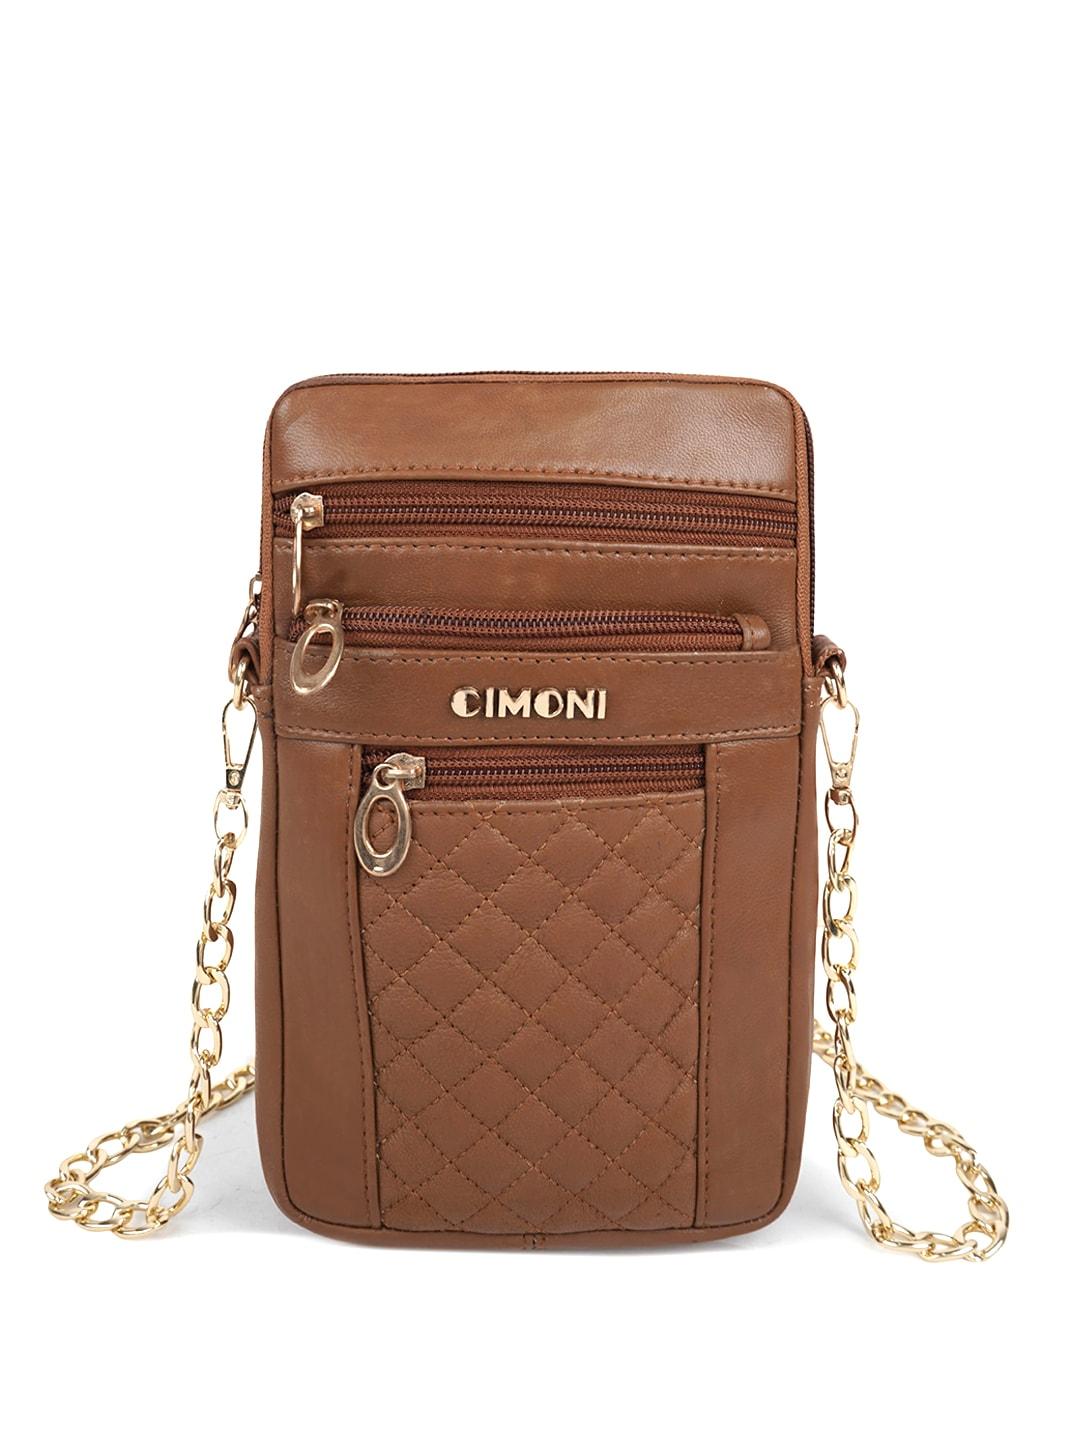 cimoni tan textured leather structured sling bag with quilted